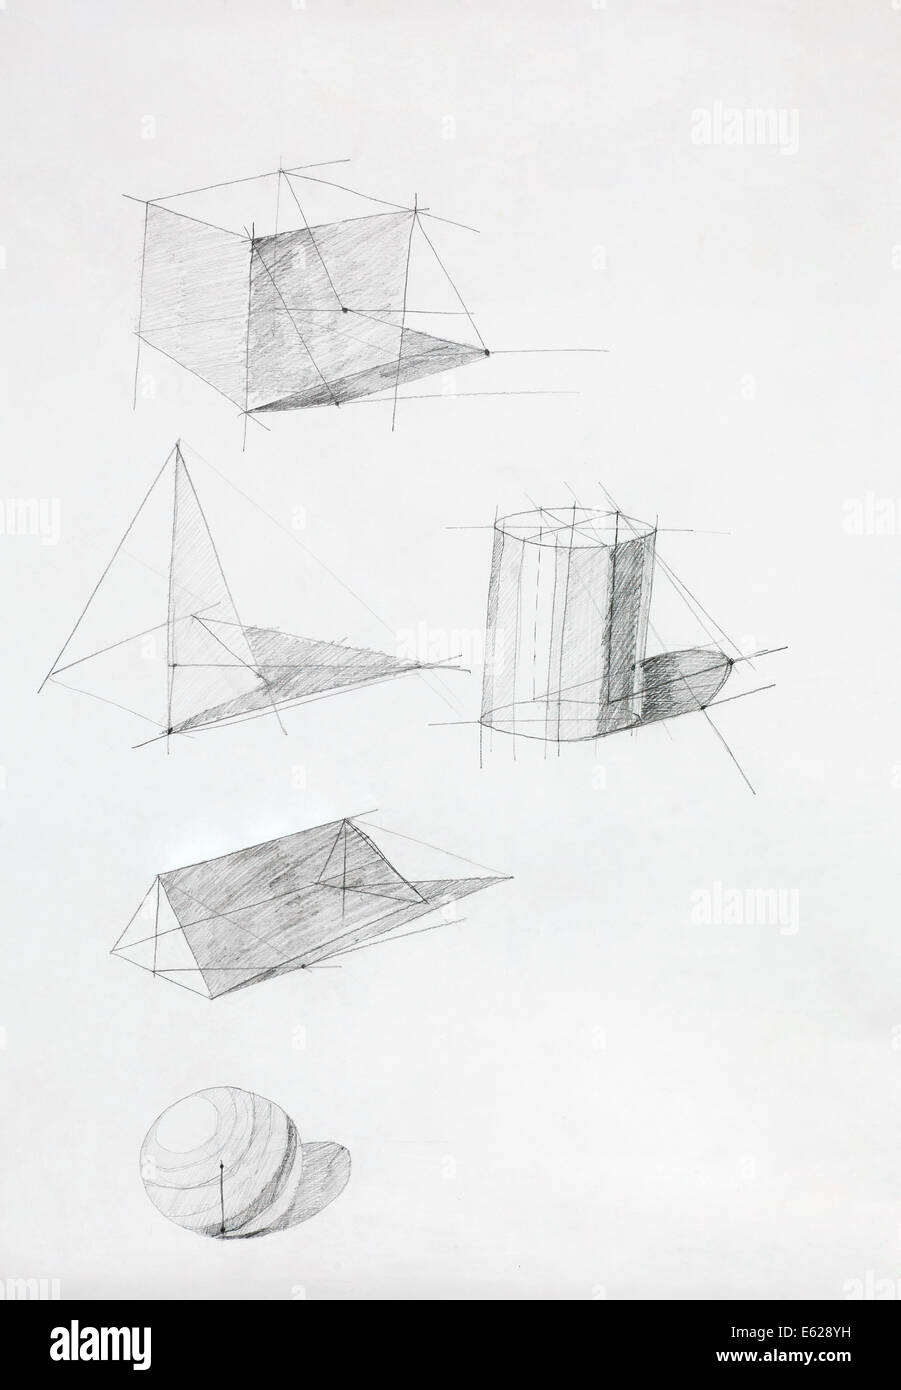 different geometric shapes with shadows, drawn by hand Stock Photo